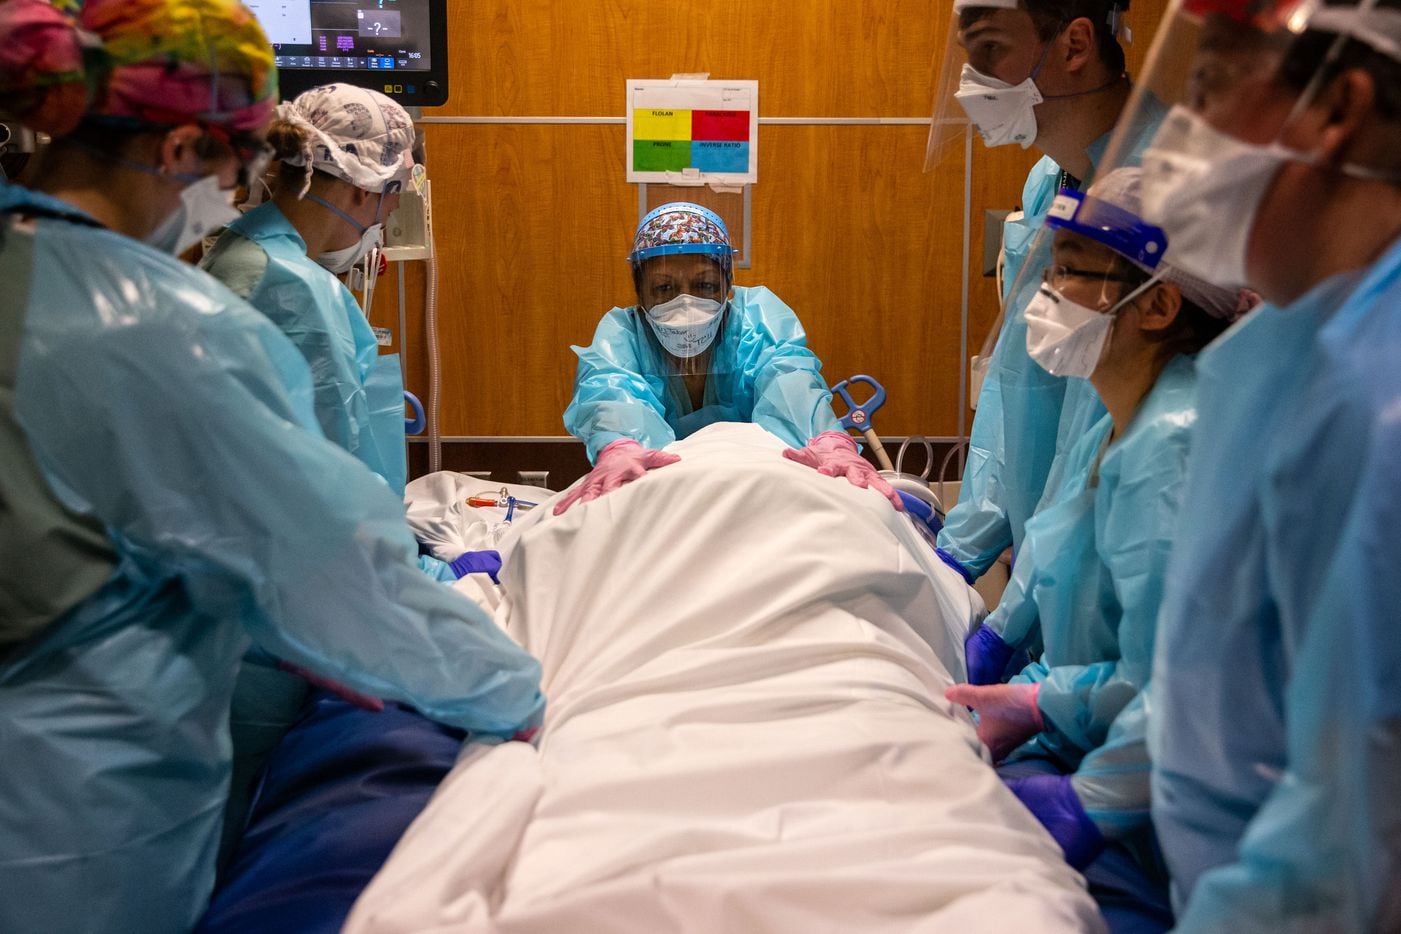 Rowley (right) assists Dr. Catherine Chen (second from right), respiratory therapist Ellen Tabor (center) and other Parkland medical staff as they prepare to turn an intubated COVID-19 patient to prone position.